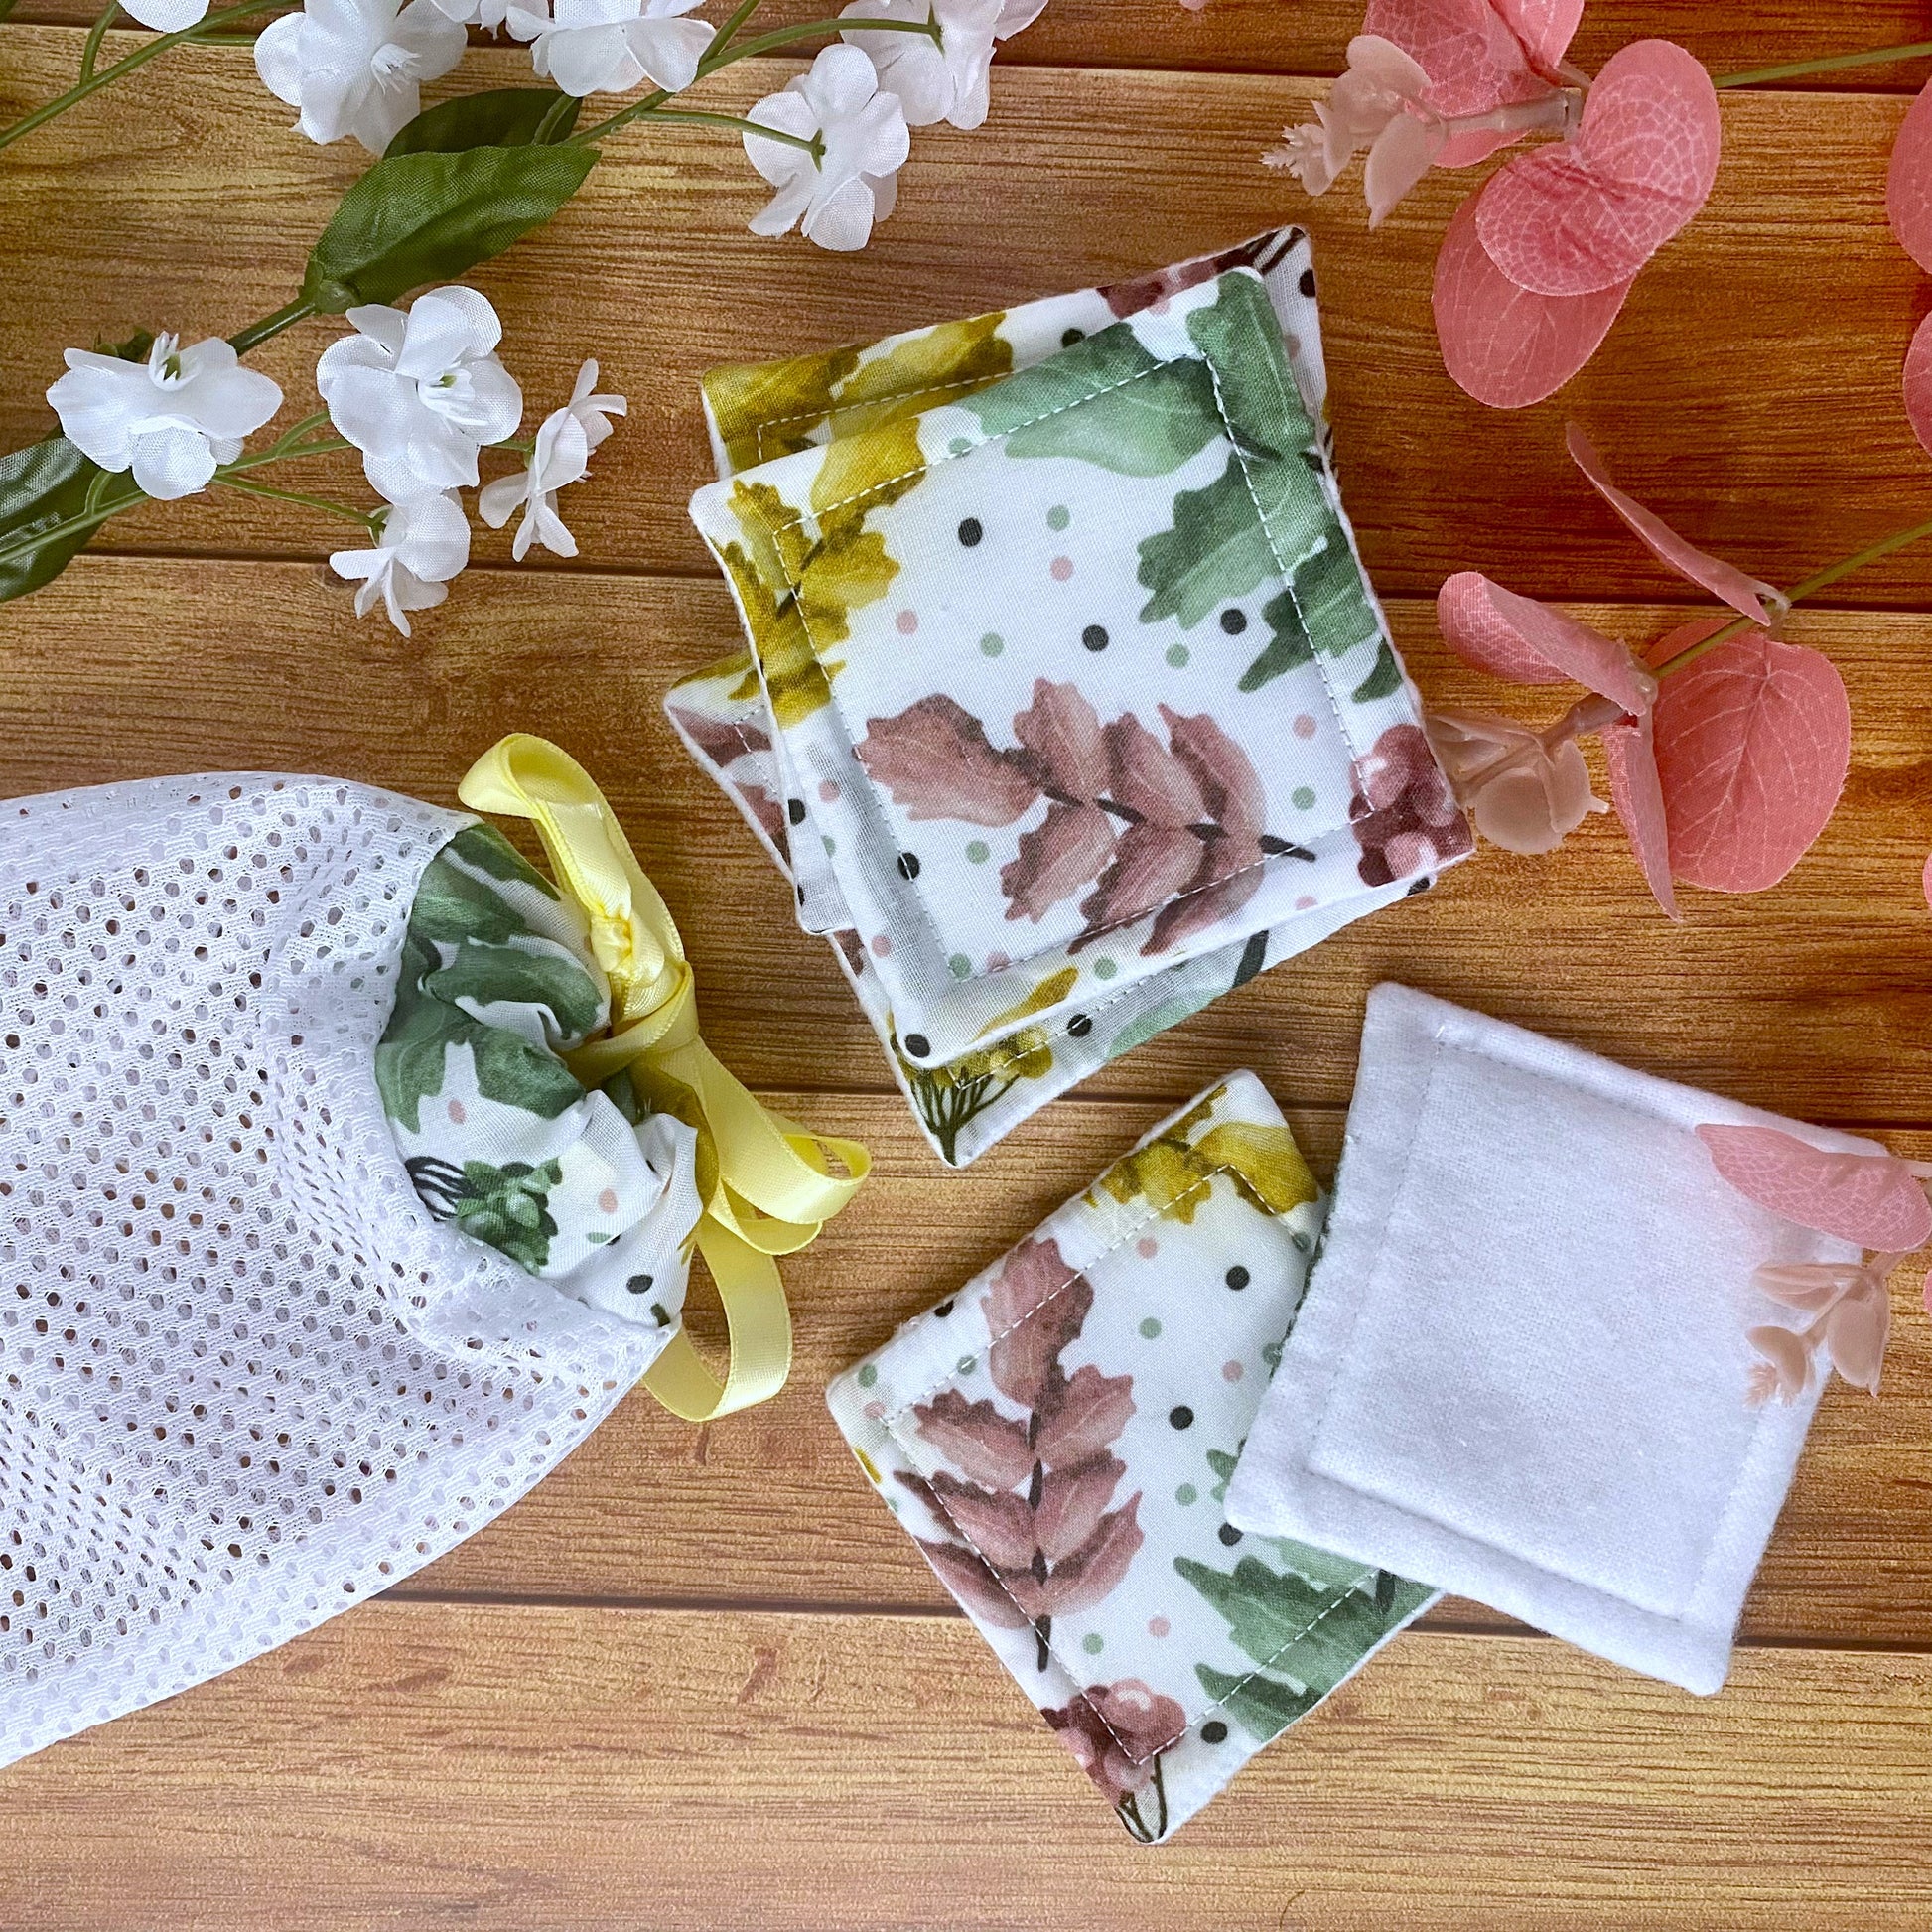 reusable skincare pads and washbag with matching pretty foliage pattern on them on wooden background